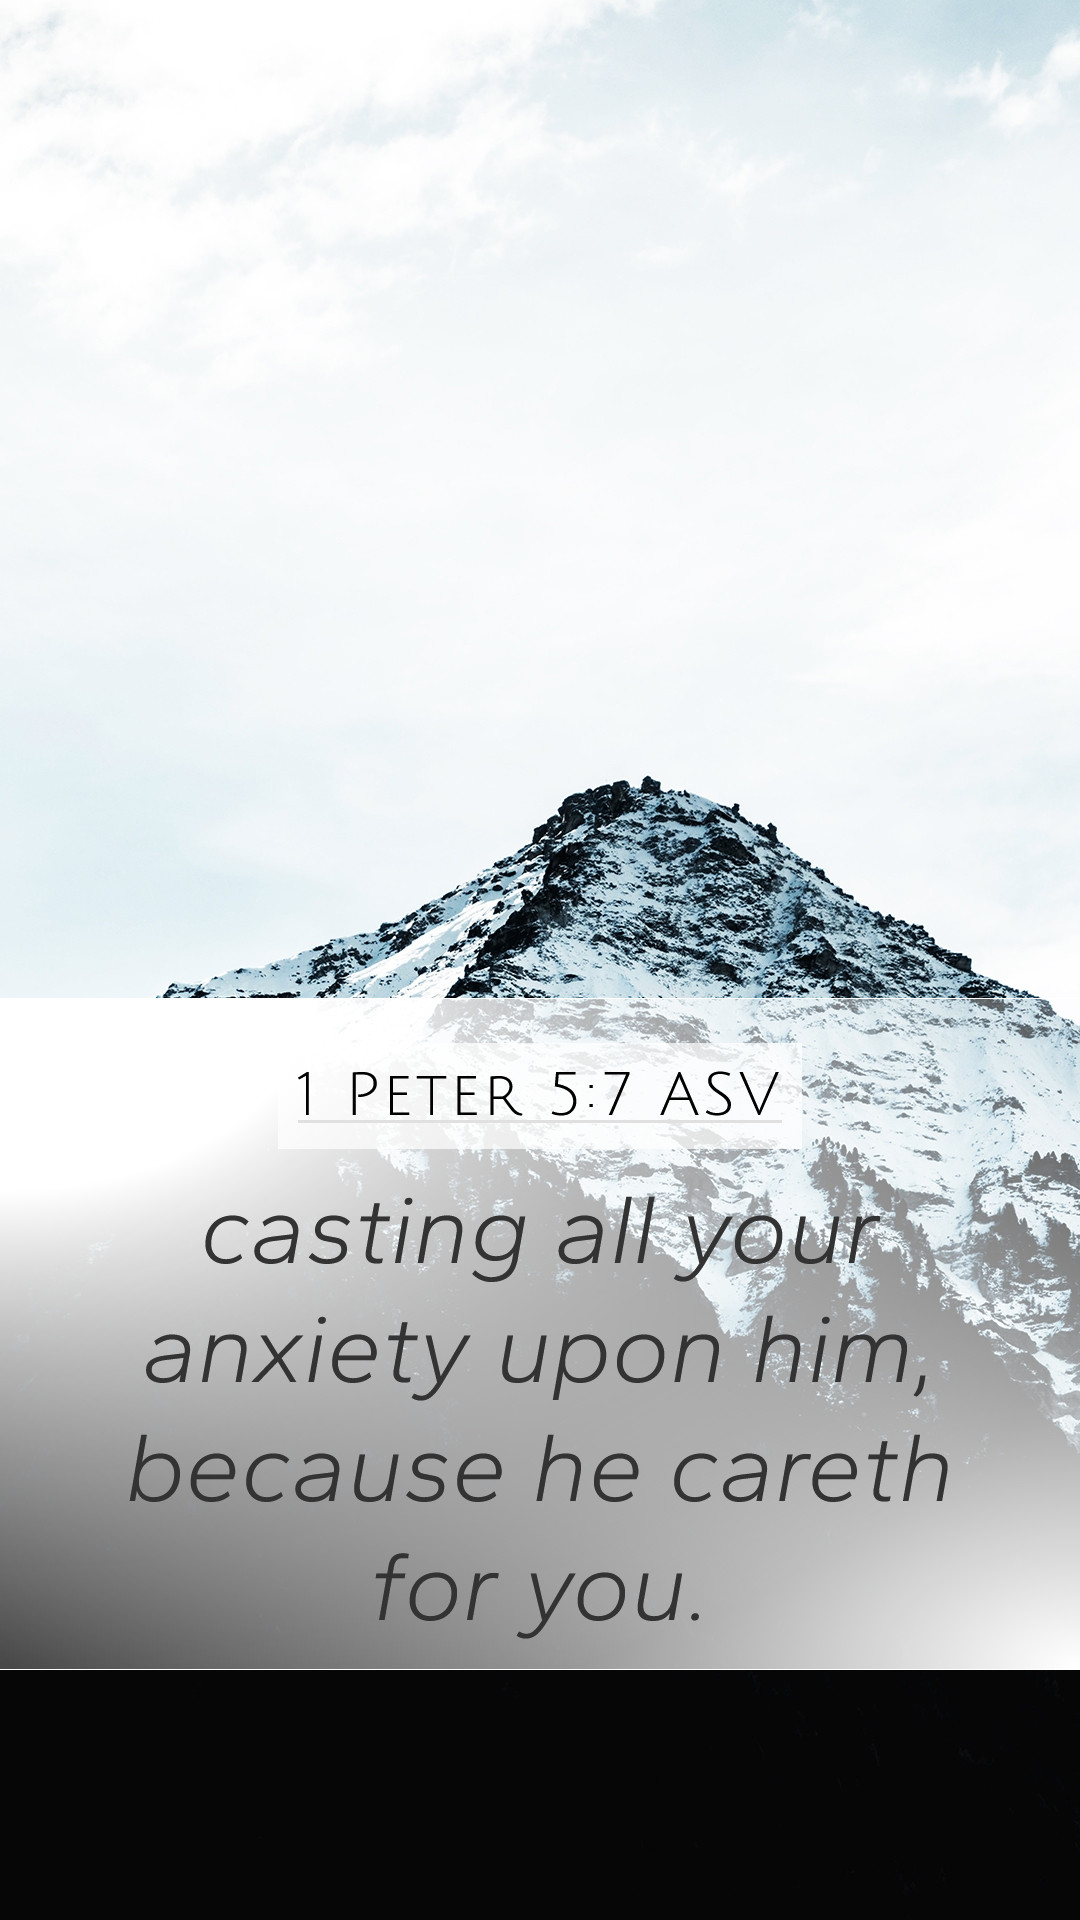 Peter 5:7 ASV Mobile Phone Wallpaper all your anxiety upon him, because he